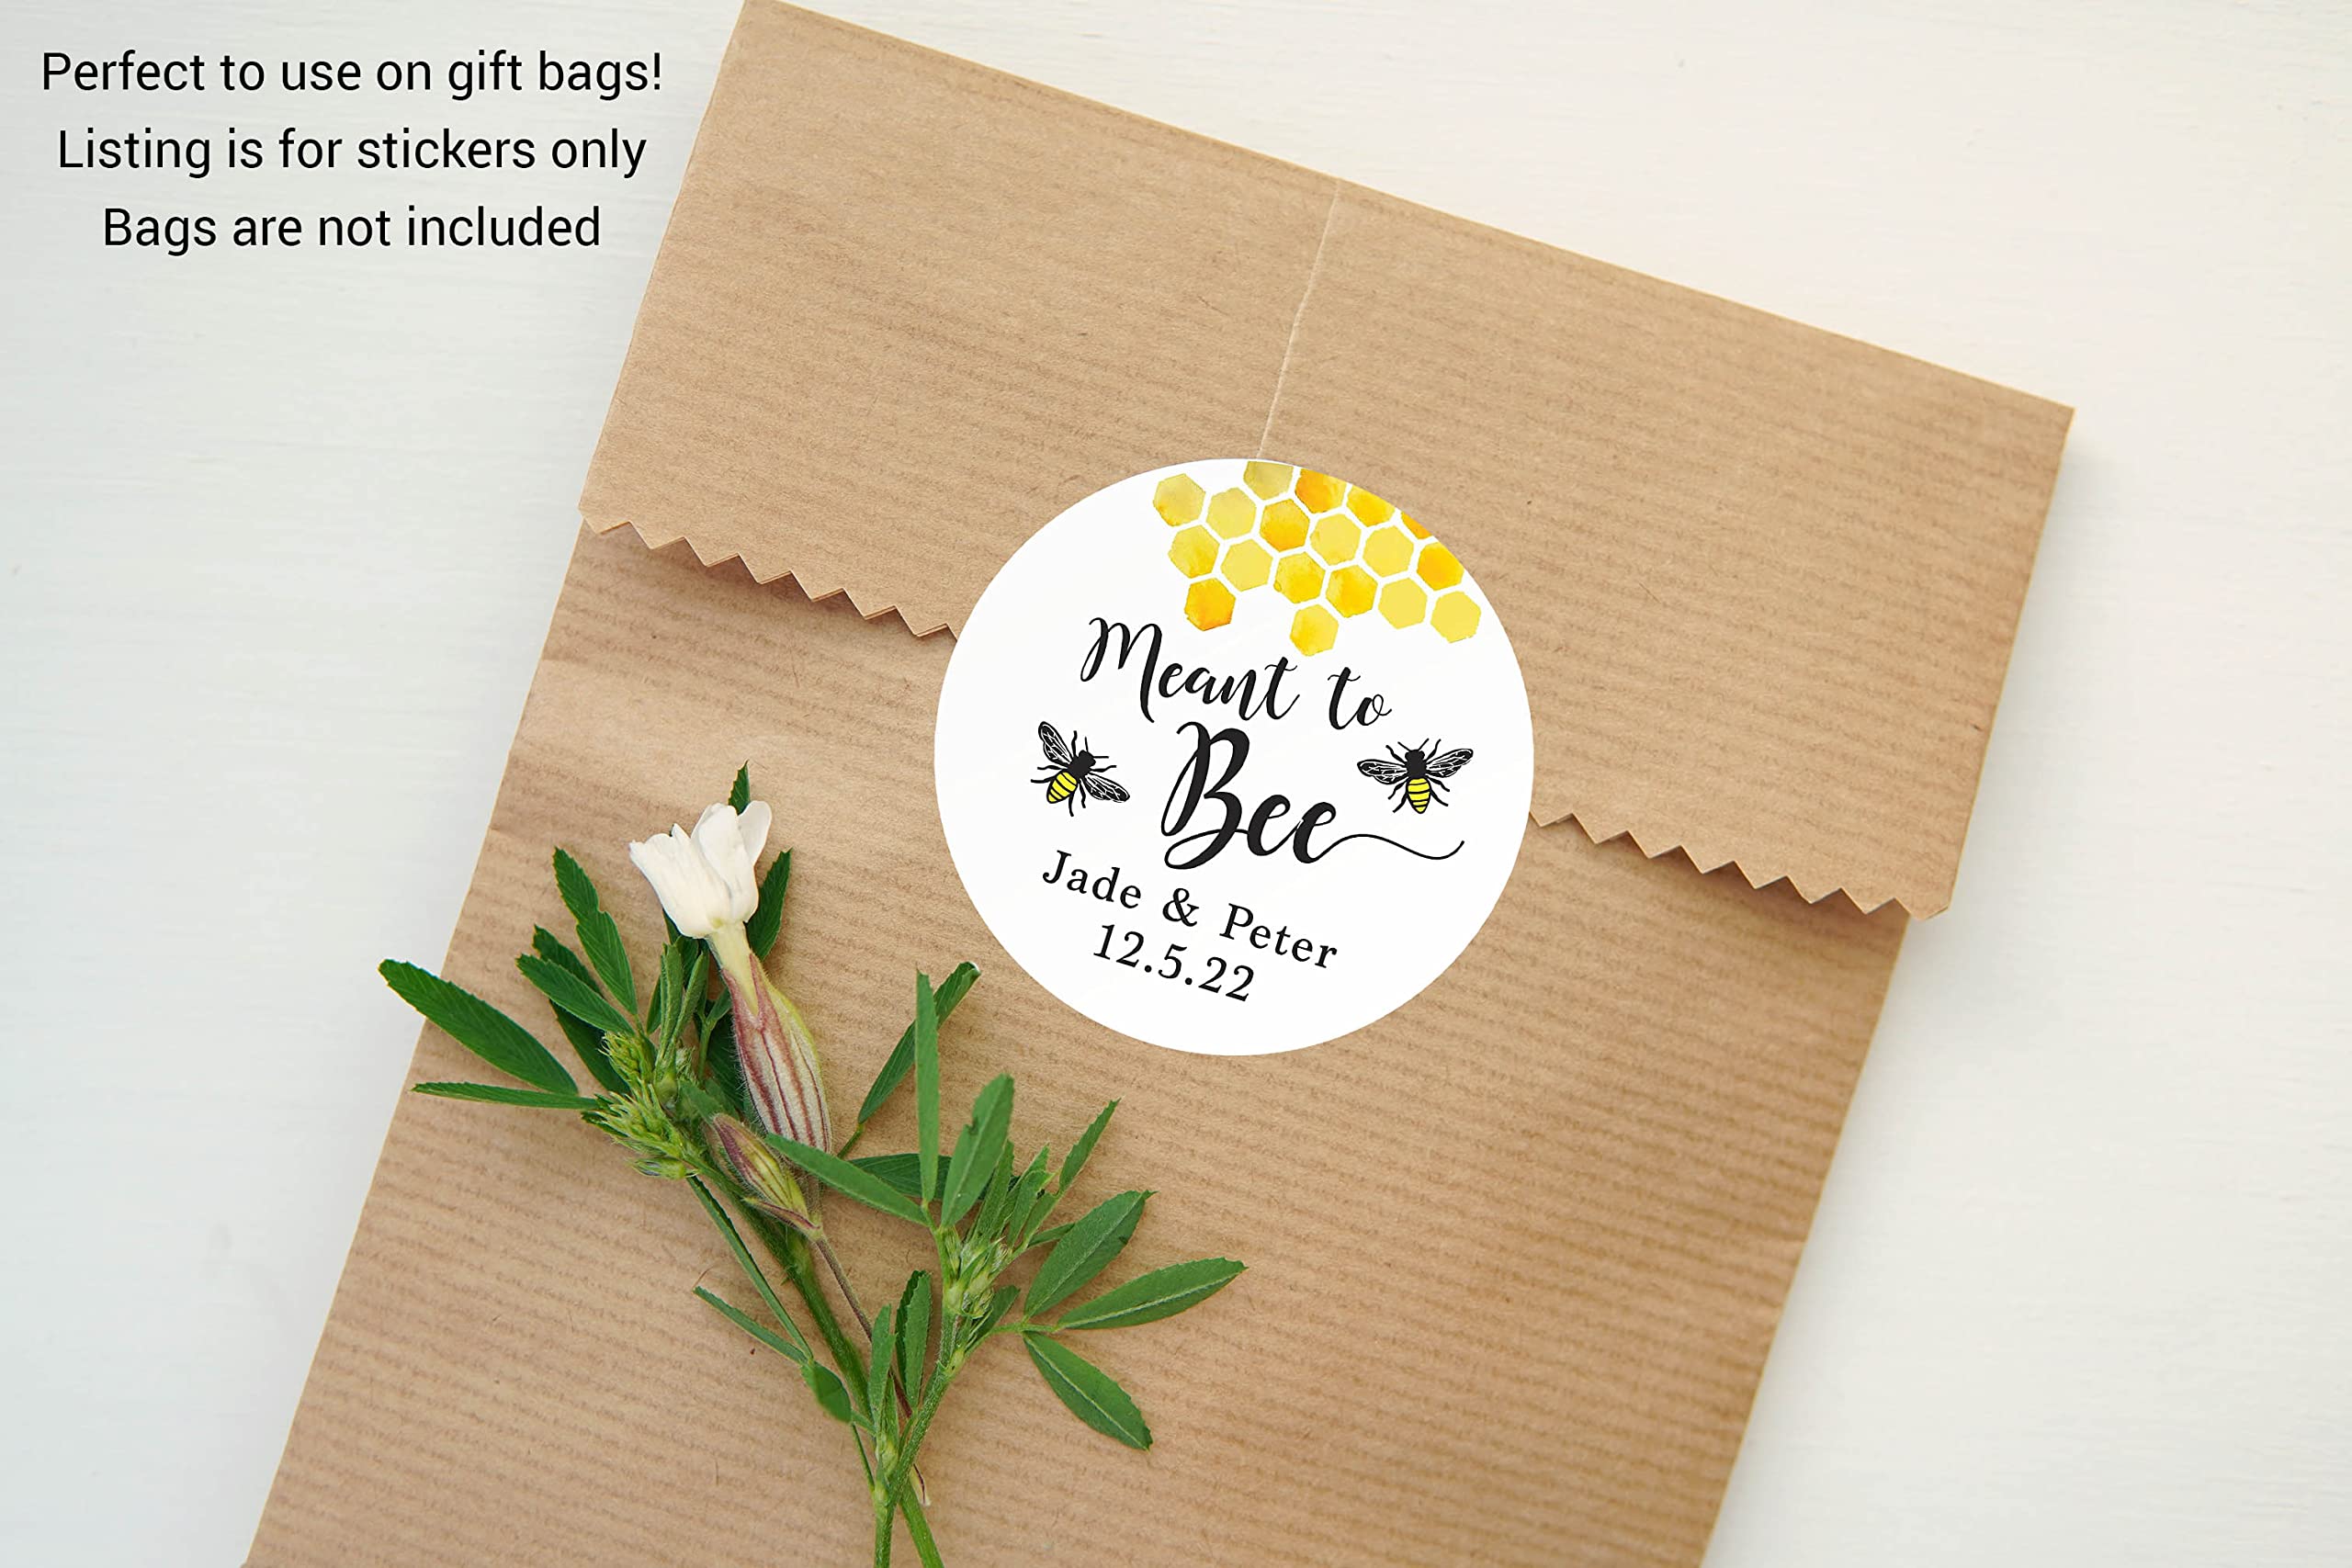 Meant to bee sticker, Honey favor stickers, Meant to bee labels, Custom wedding stickers, Honey bee party